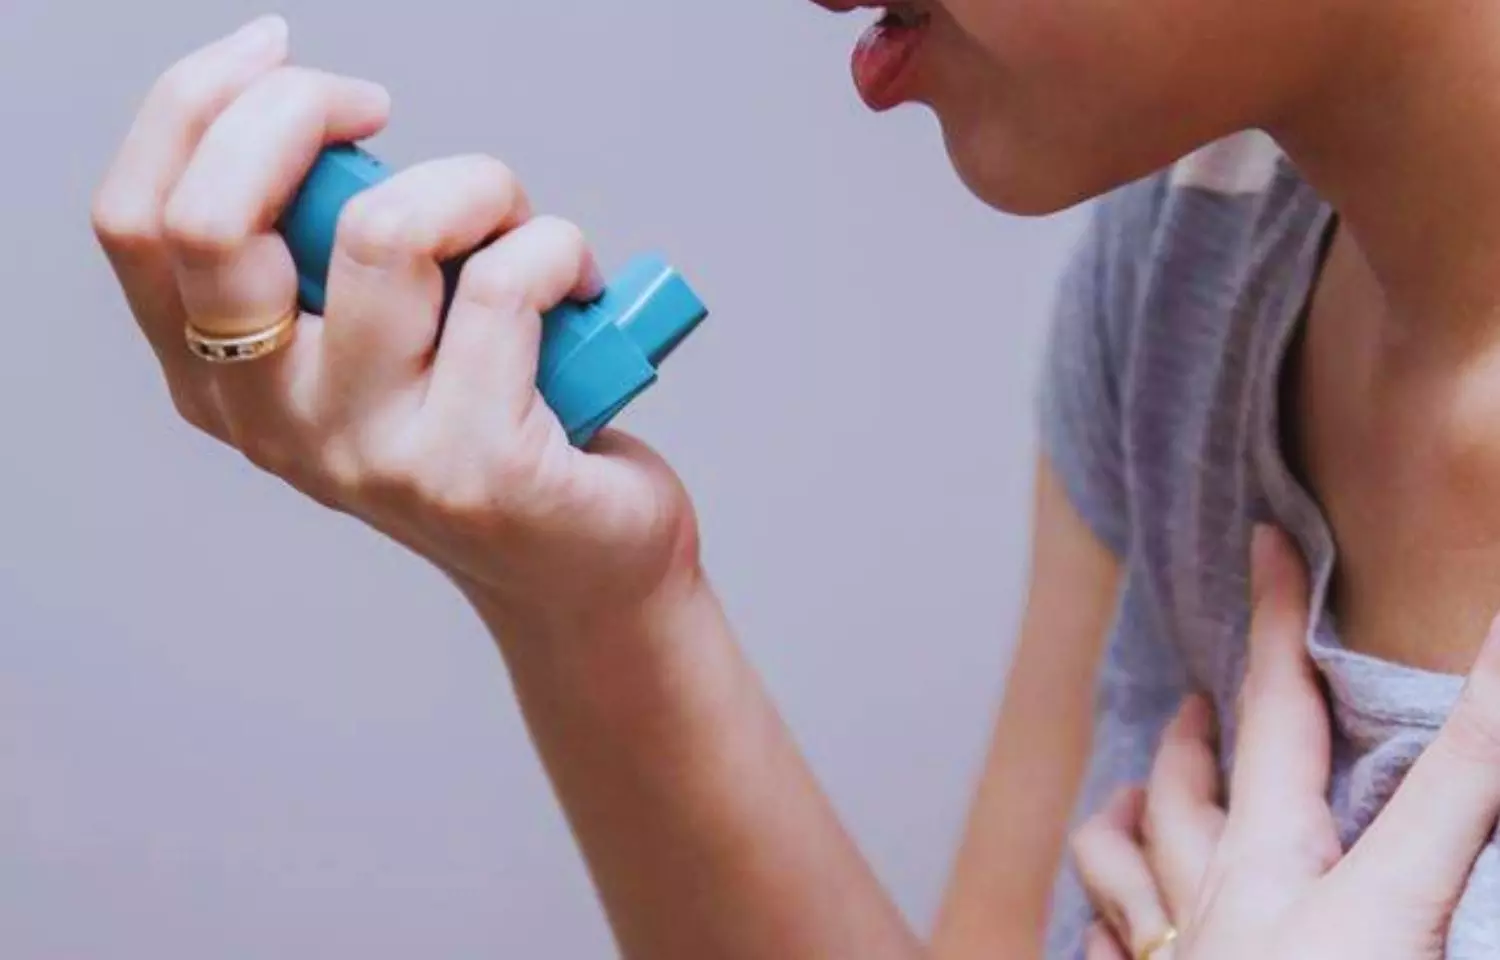 Lebrikizumab as safe as placebo among adults and adolescents with uncontrolled asthma